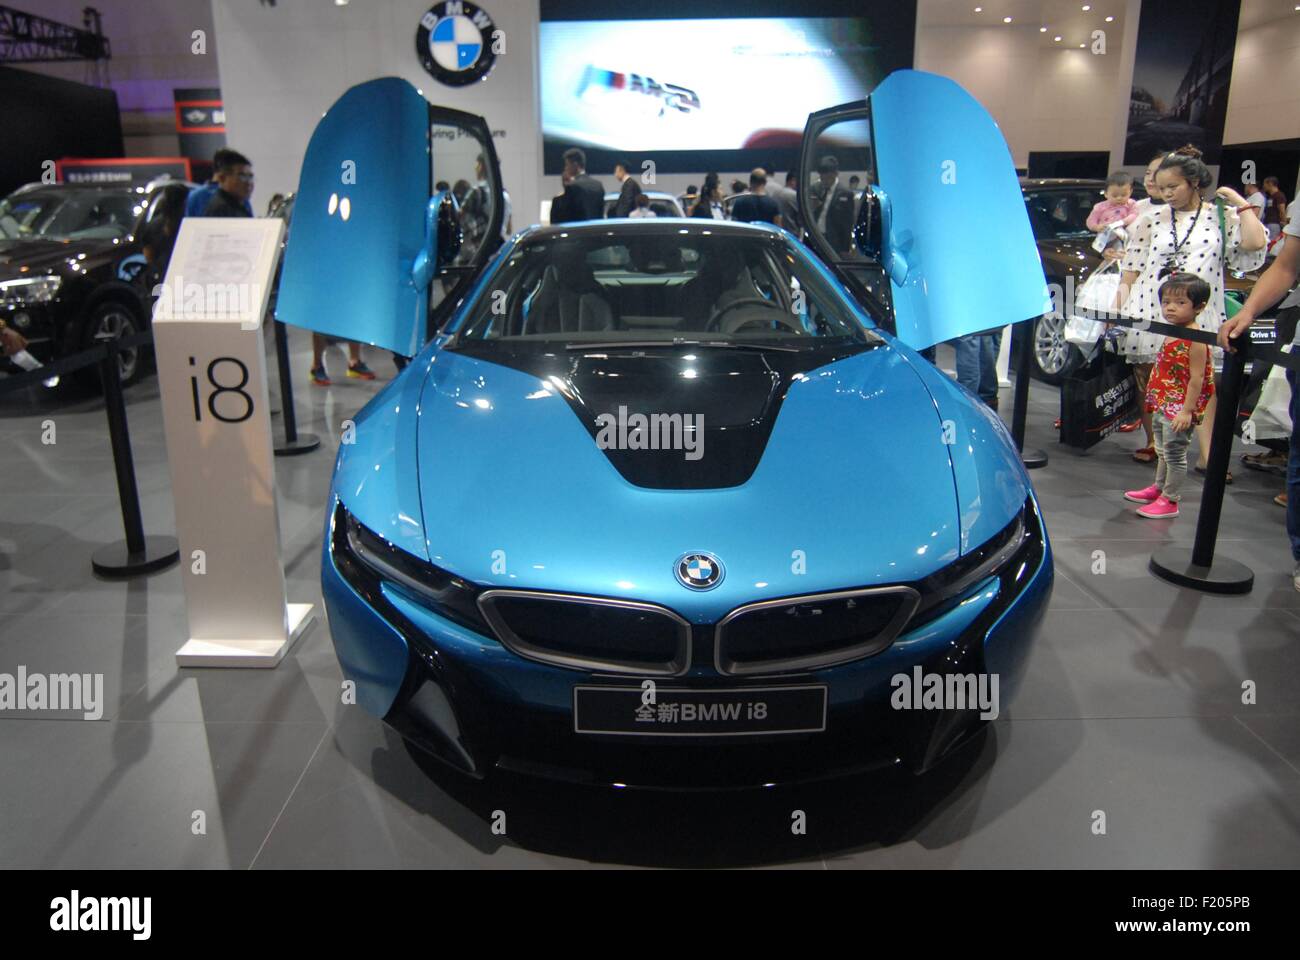 Qingdao. 9th Sep, 2015. Photo taken on Sept. 9, 2015 shows a BMW i8 sports car at Qingdao Autumn International Auto Show 2015 in Qingdao, east China's Shandong Province. The six-day auto show, which kicked off here Wednesday, attracted more than 100 domestic and overseas automakers. Over 30 automakers released their new cars during the show. © Wang Haibin/Xinhua/Alamy Live News Stock Photo